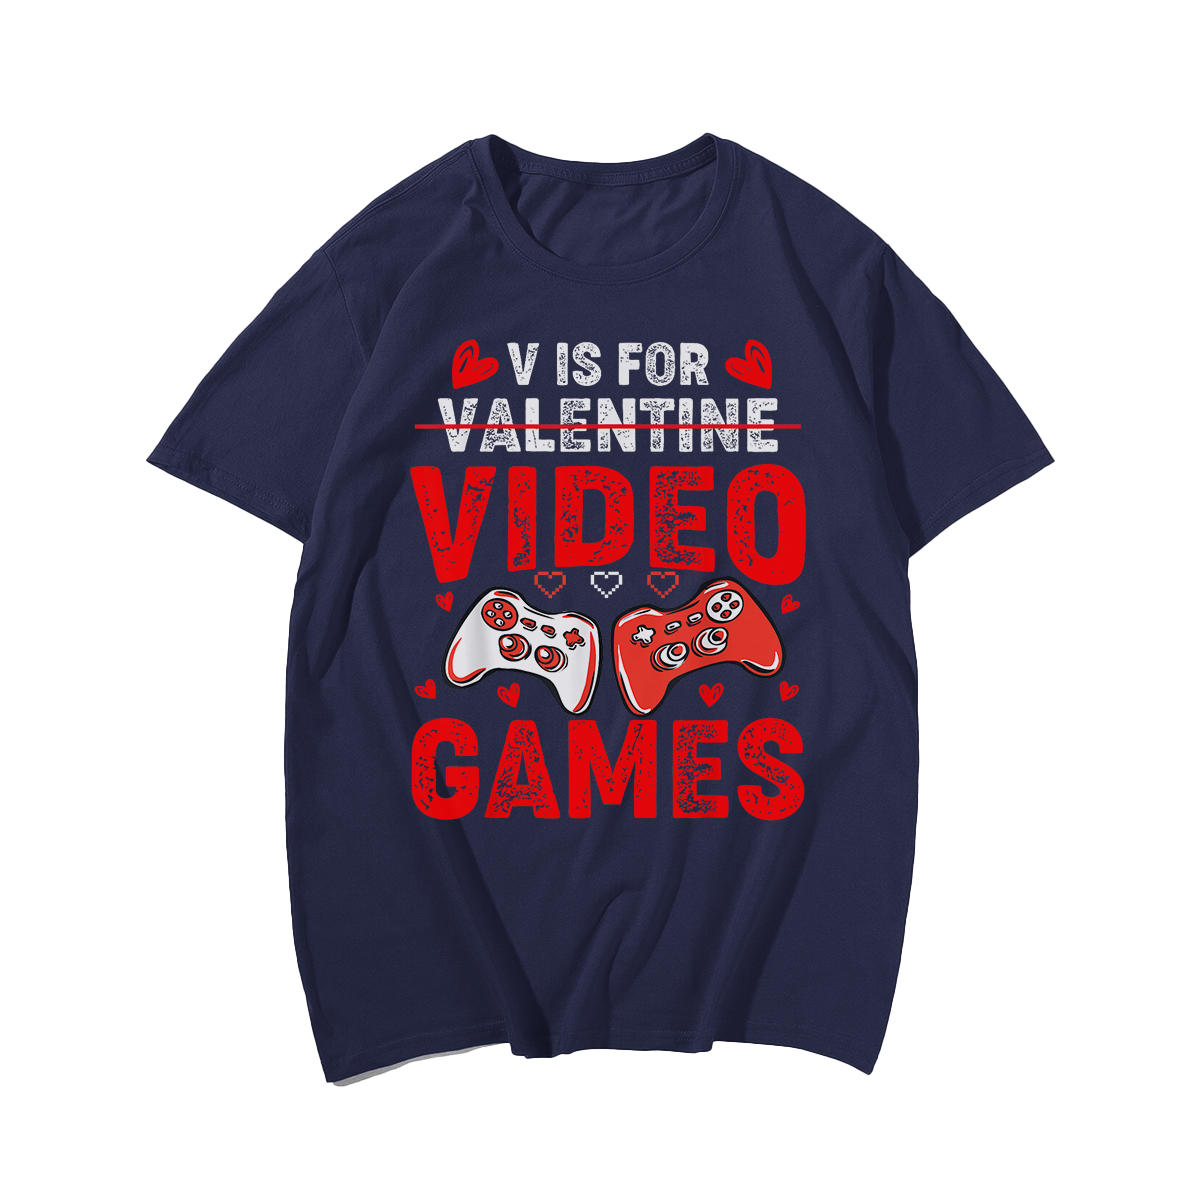 V IS FOR VIDEO GAMES Funny Valentines Day T-Shirt, Men Plus Size Oversize T-shirt for Big & Tall Man